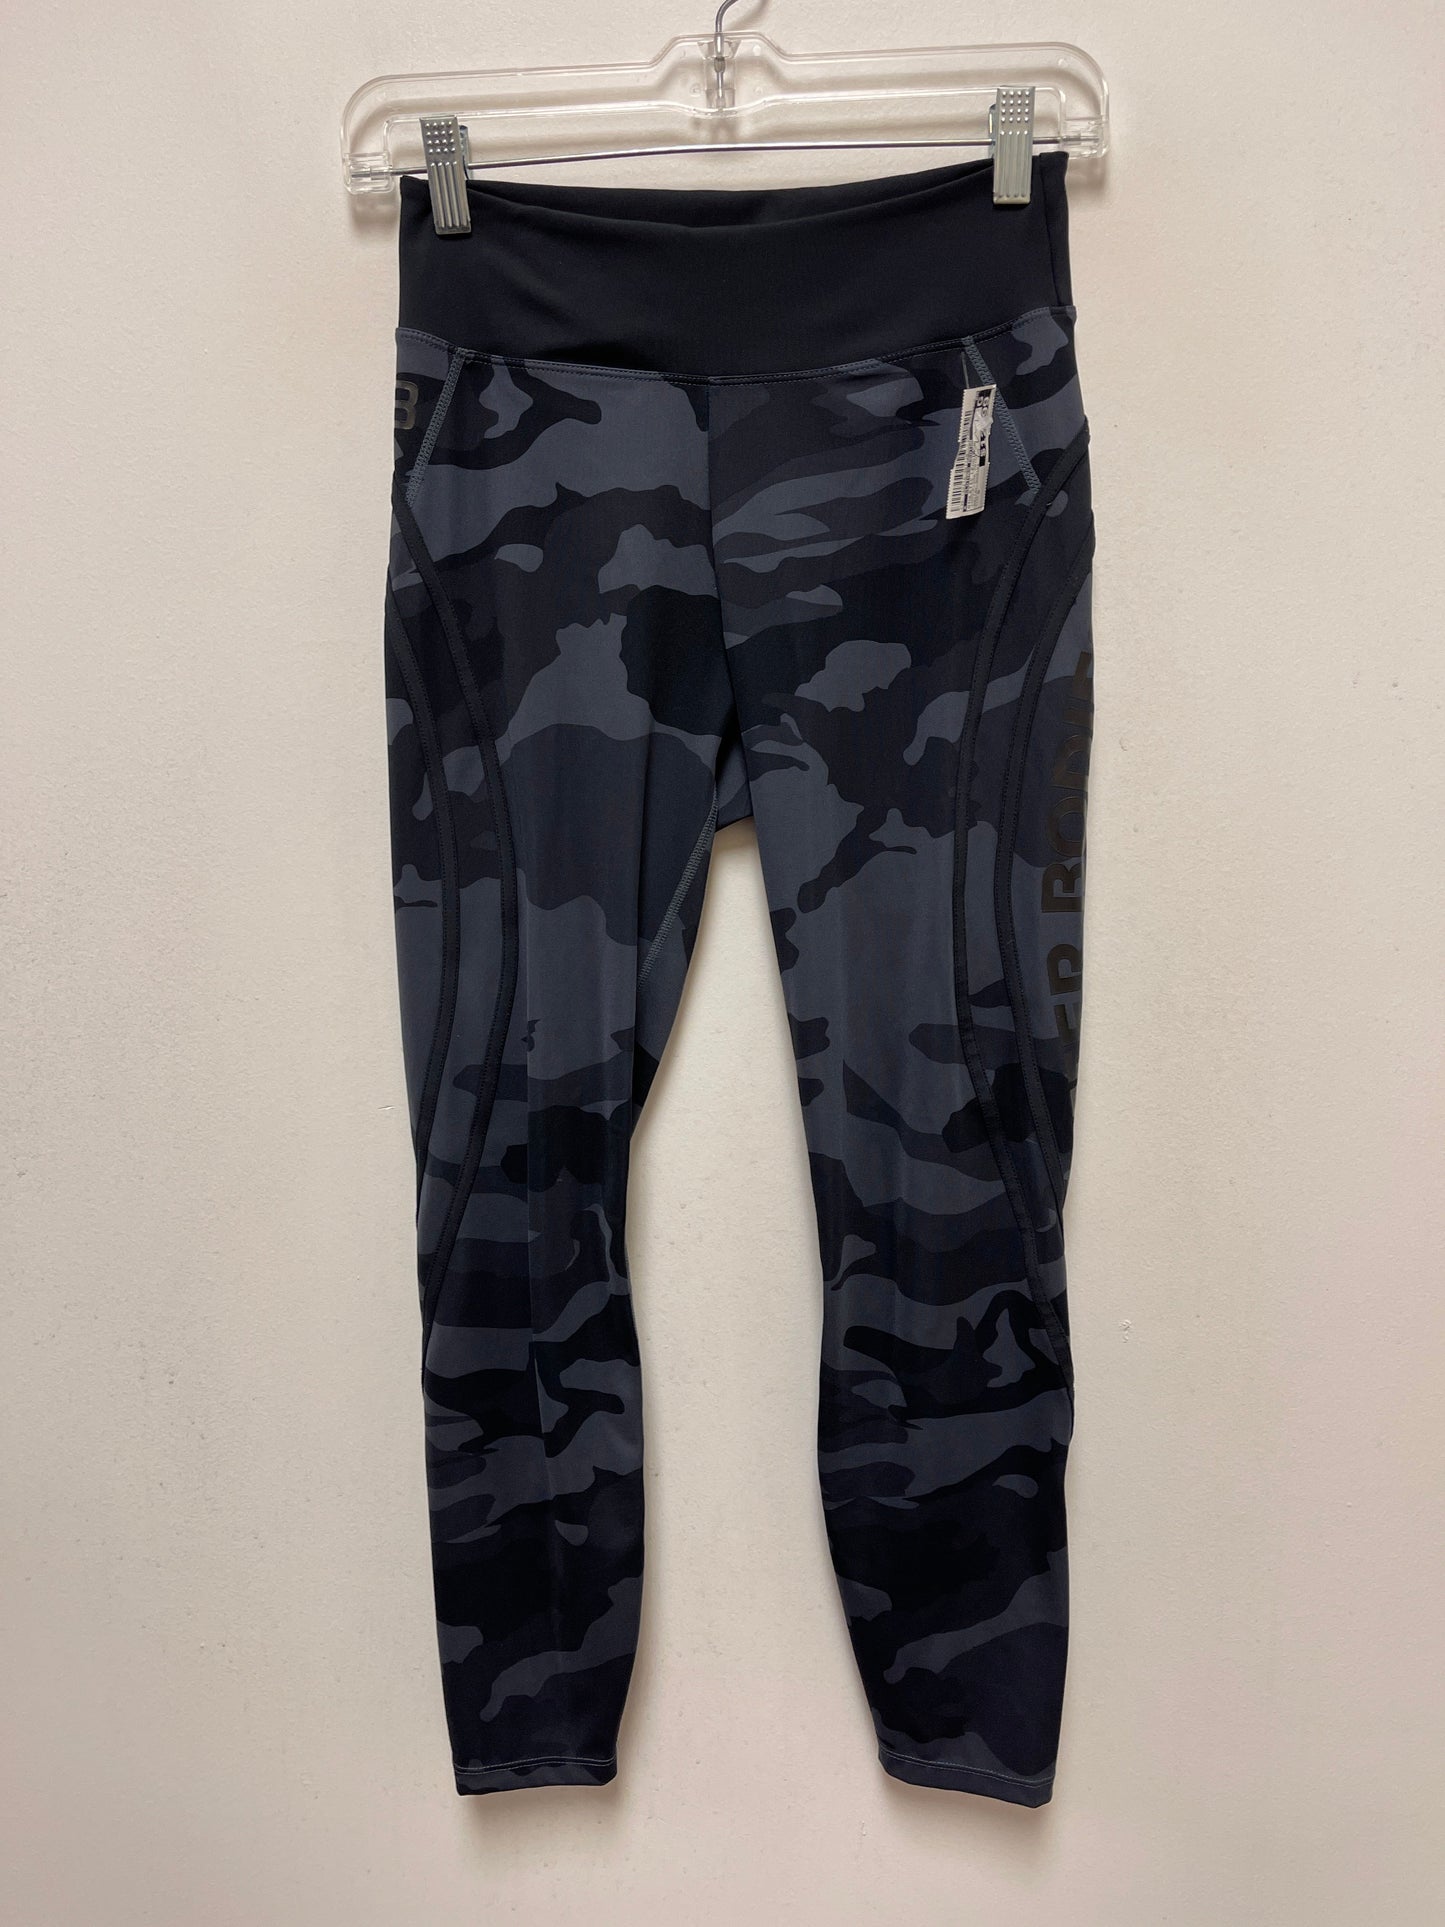 Camouflage Print Athletic Leggings Clothes Mentor, Size 8